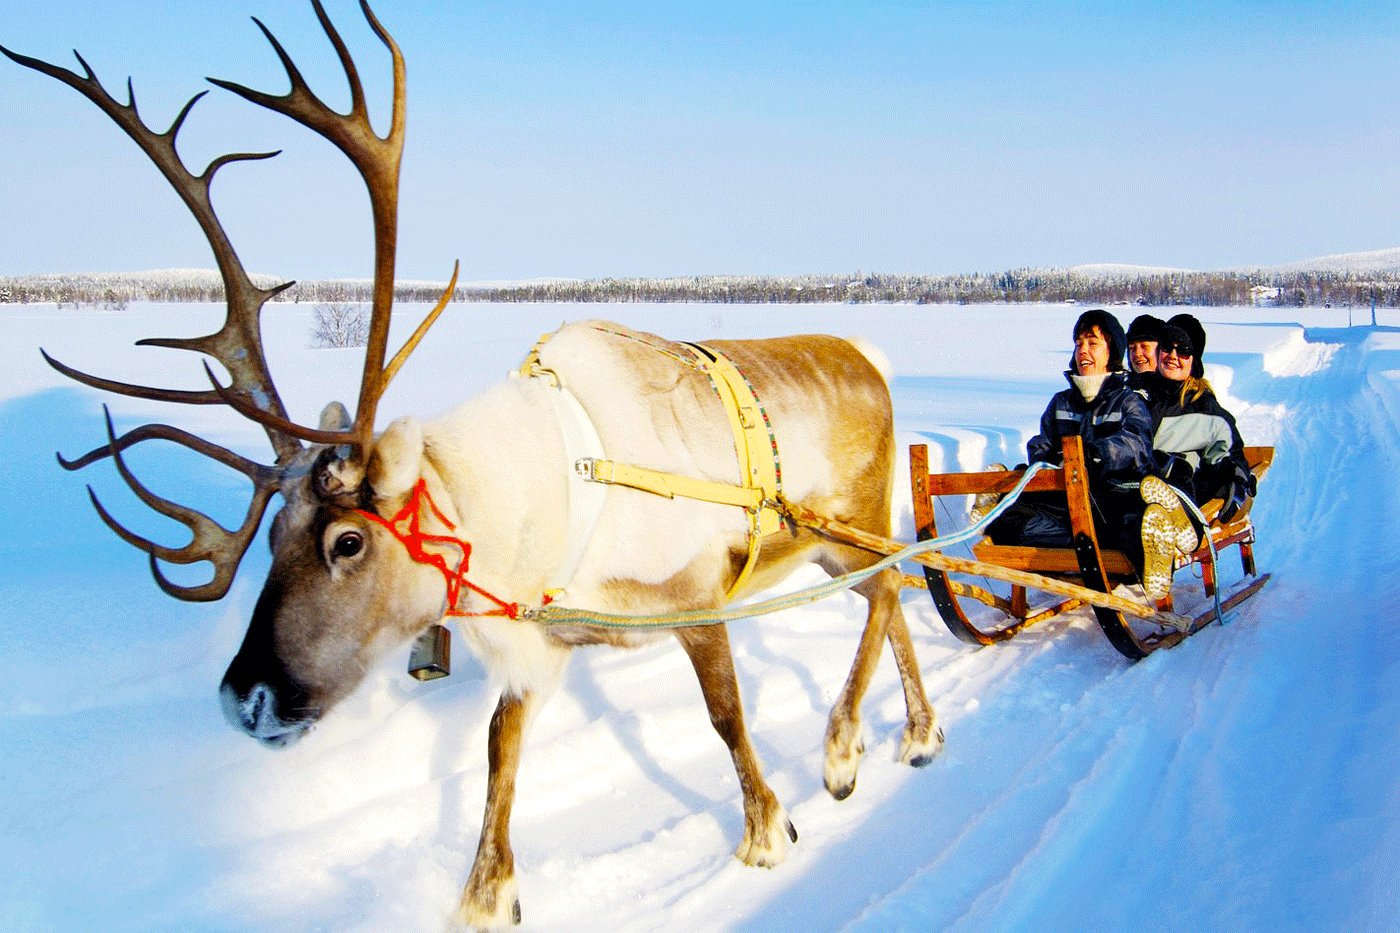 How to take a reindeer-drawn sledge ride beyond the polar circle in Rovaniemi